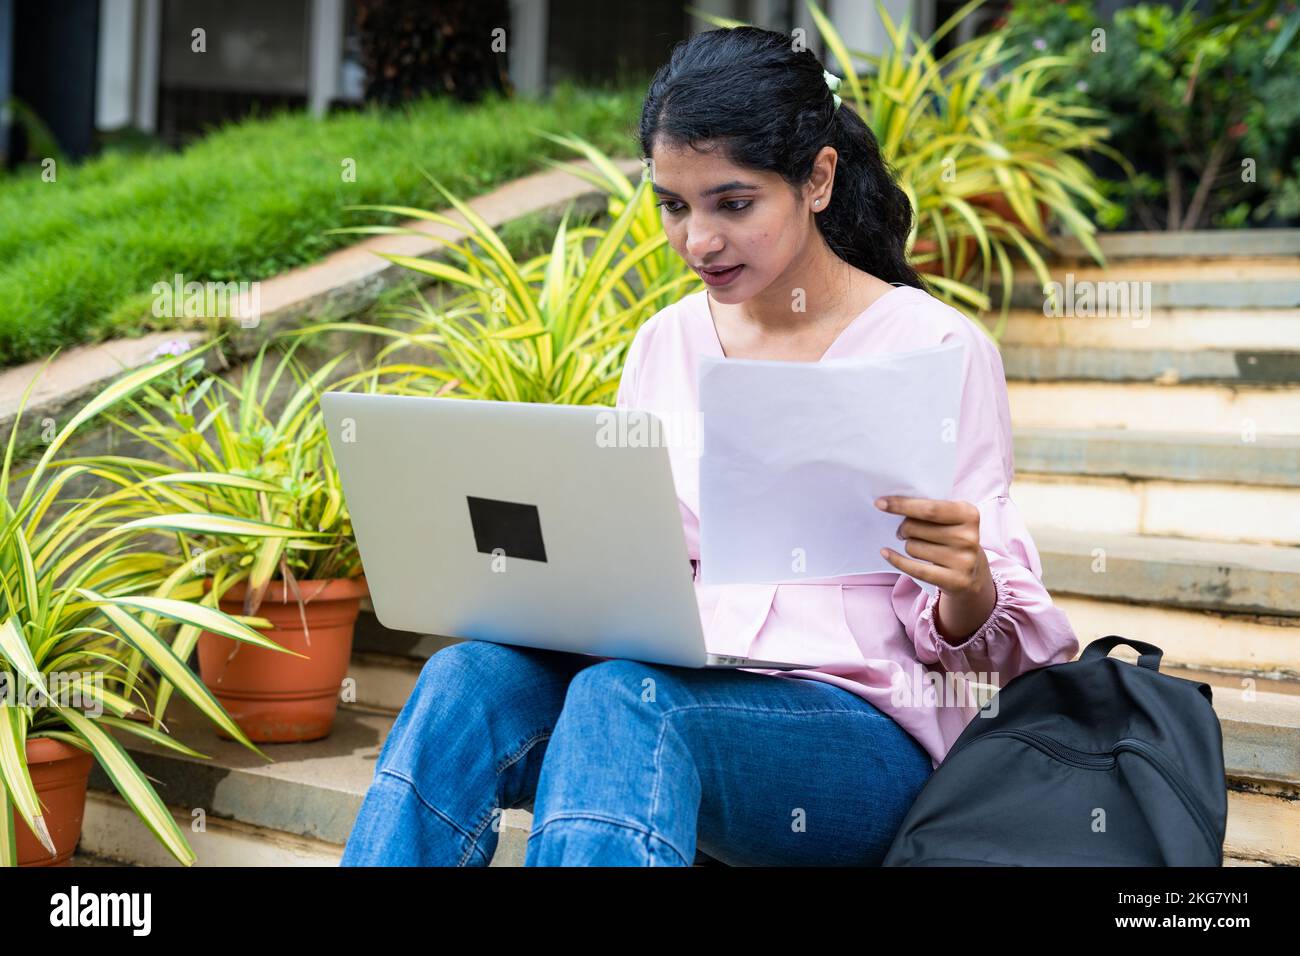 young student at college campus buys working on project using laptop - concept of learning or exam preparation, knowledge and hard-working Stock Photo